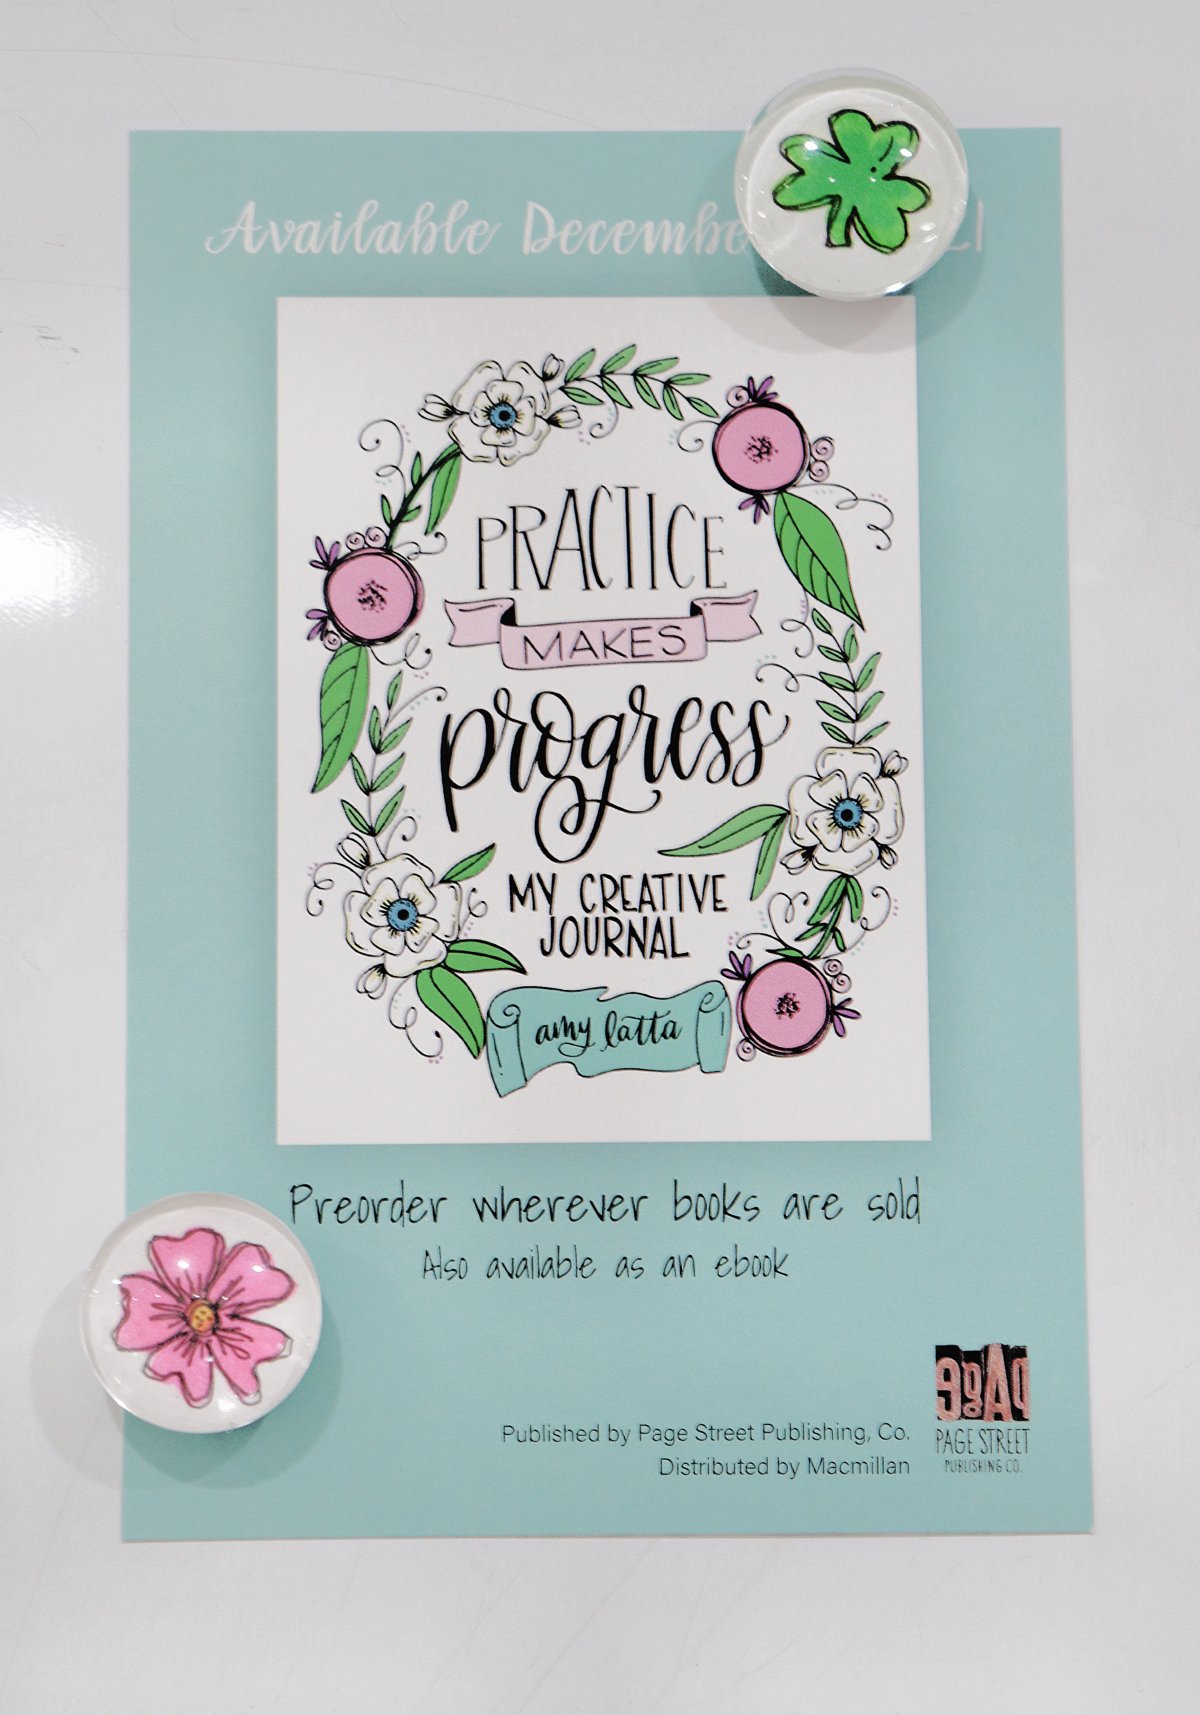 Image contains a teal promotional flyer for the new book Practice Makes Progress, attached to a white board with two handmade magnets. One magnet features a green shamrock and the other features a pink hand-drawn flower.